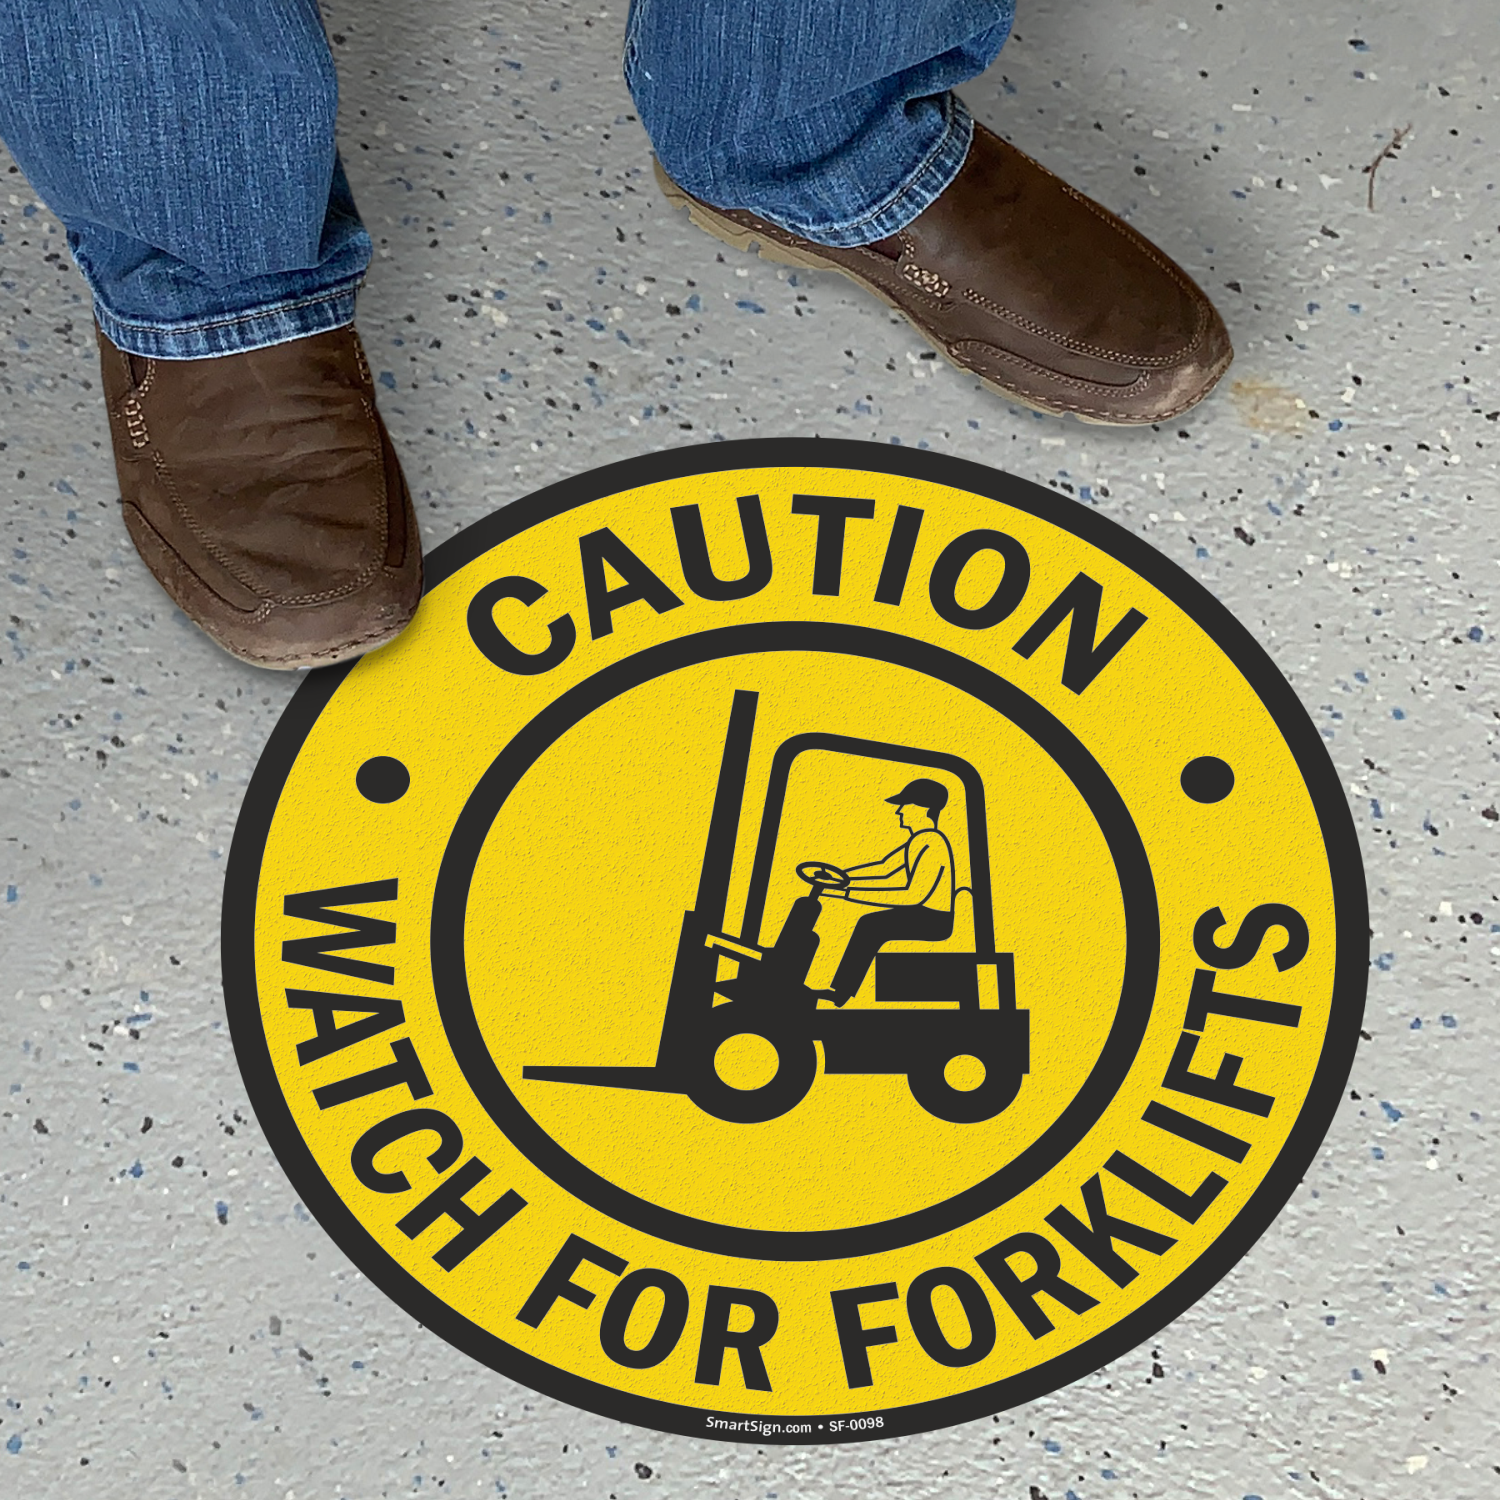 Caution Watch For Forklifts Adhesive Floor Sign